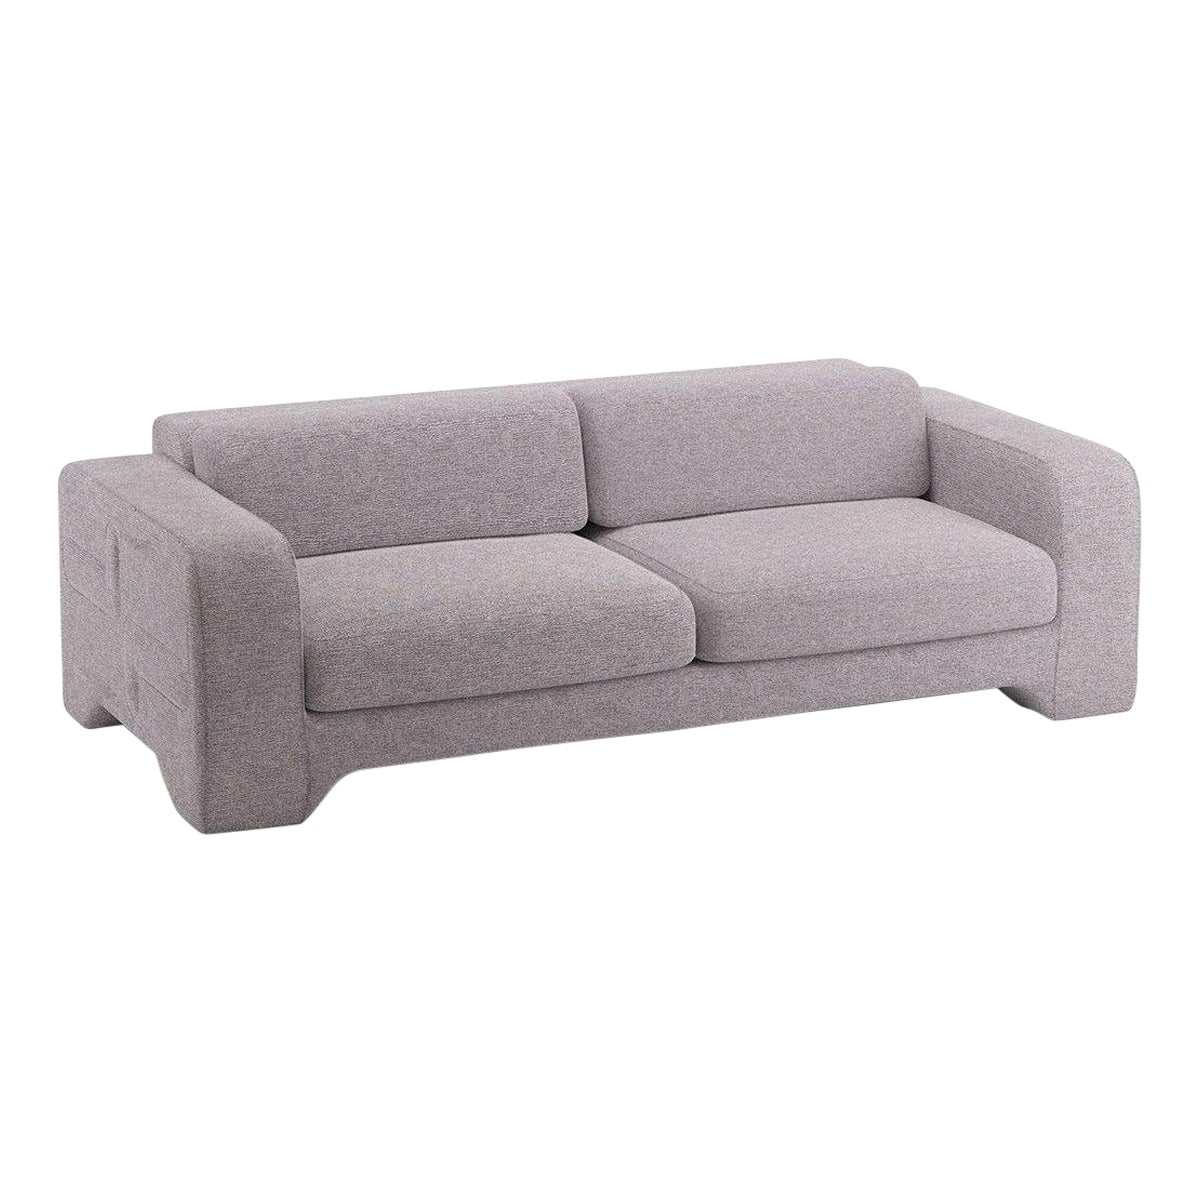 Popus Editions Giovanna 4 Seater Sofa in Mouse Megeve Fabric with Knit Effect For Sale